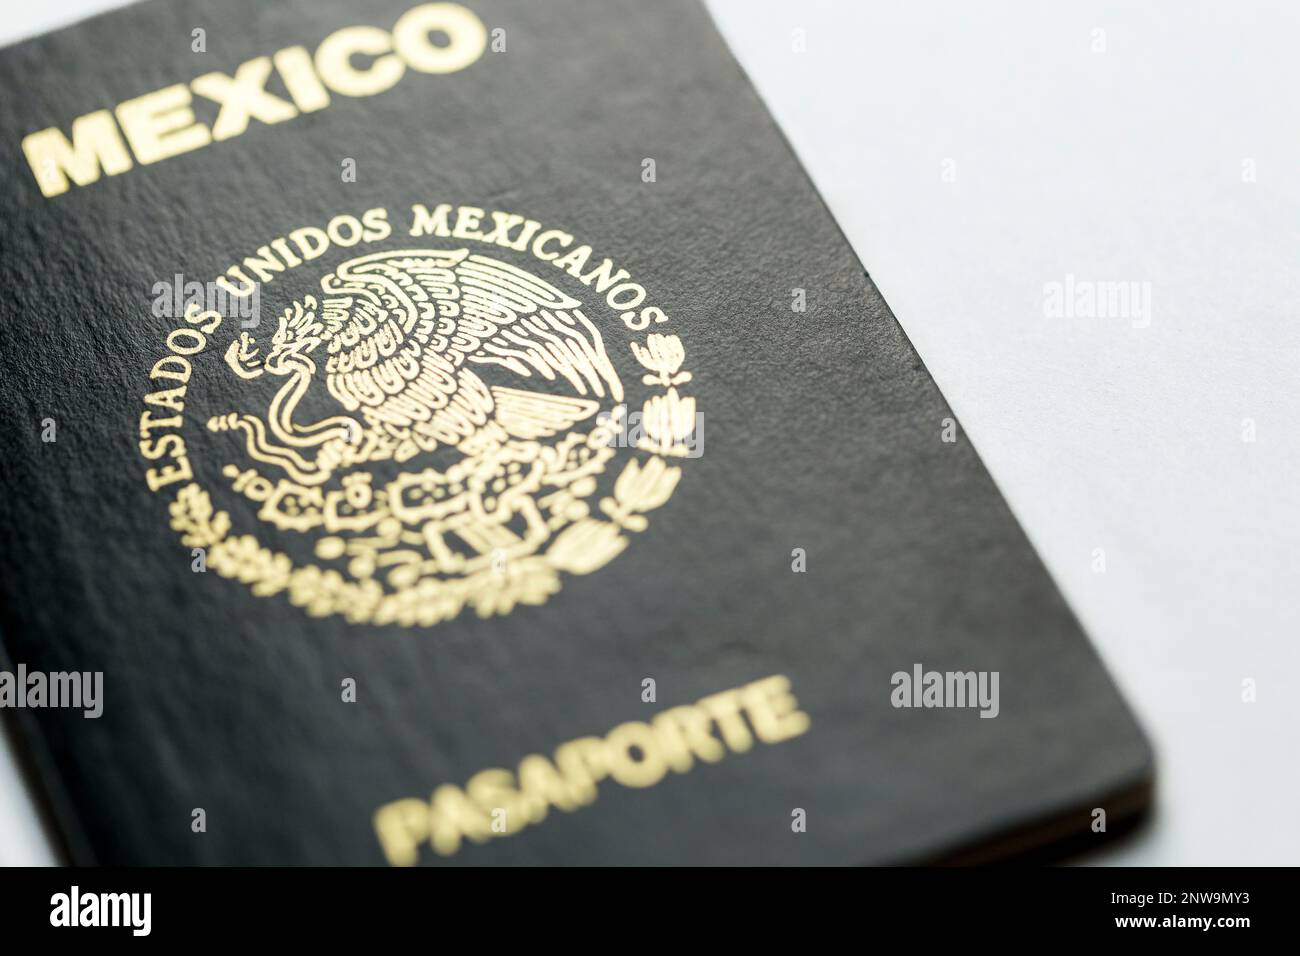 What Are the Requirements for a Mexican Passport?